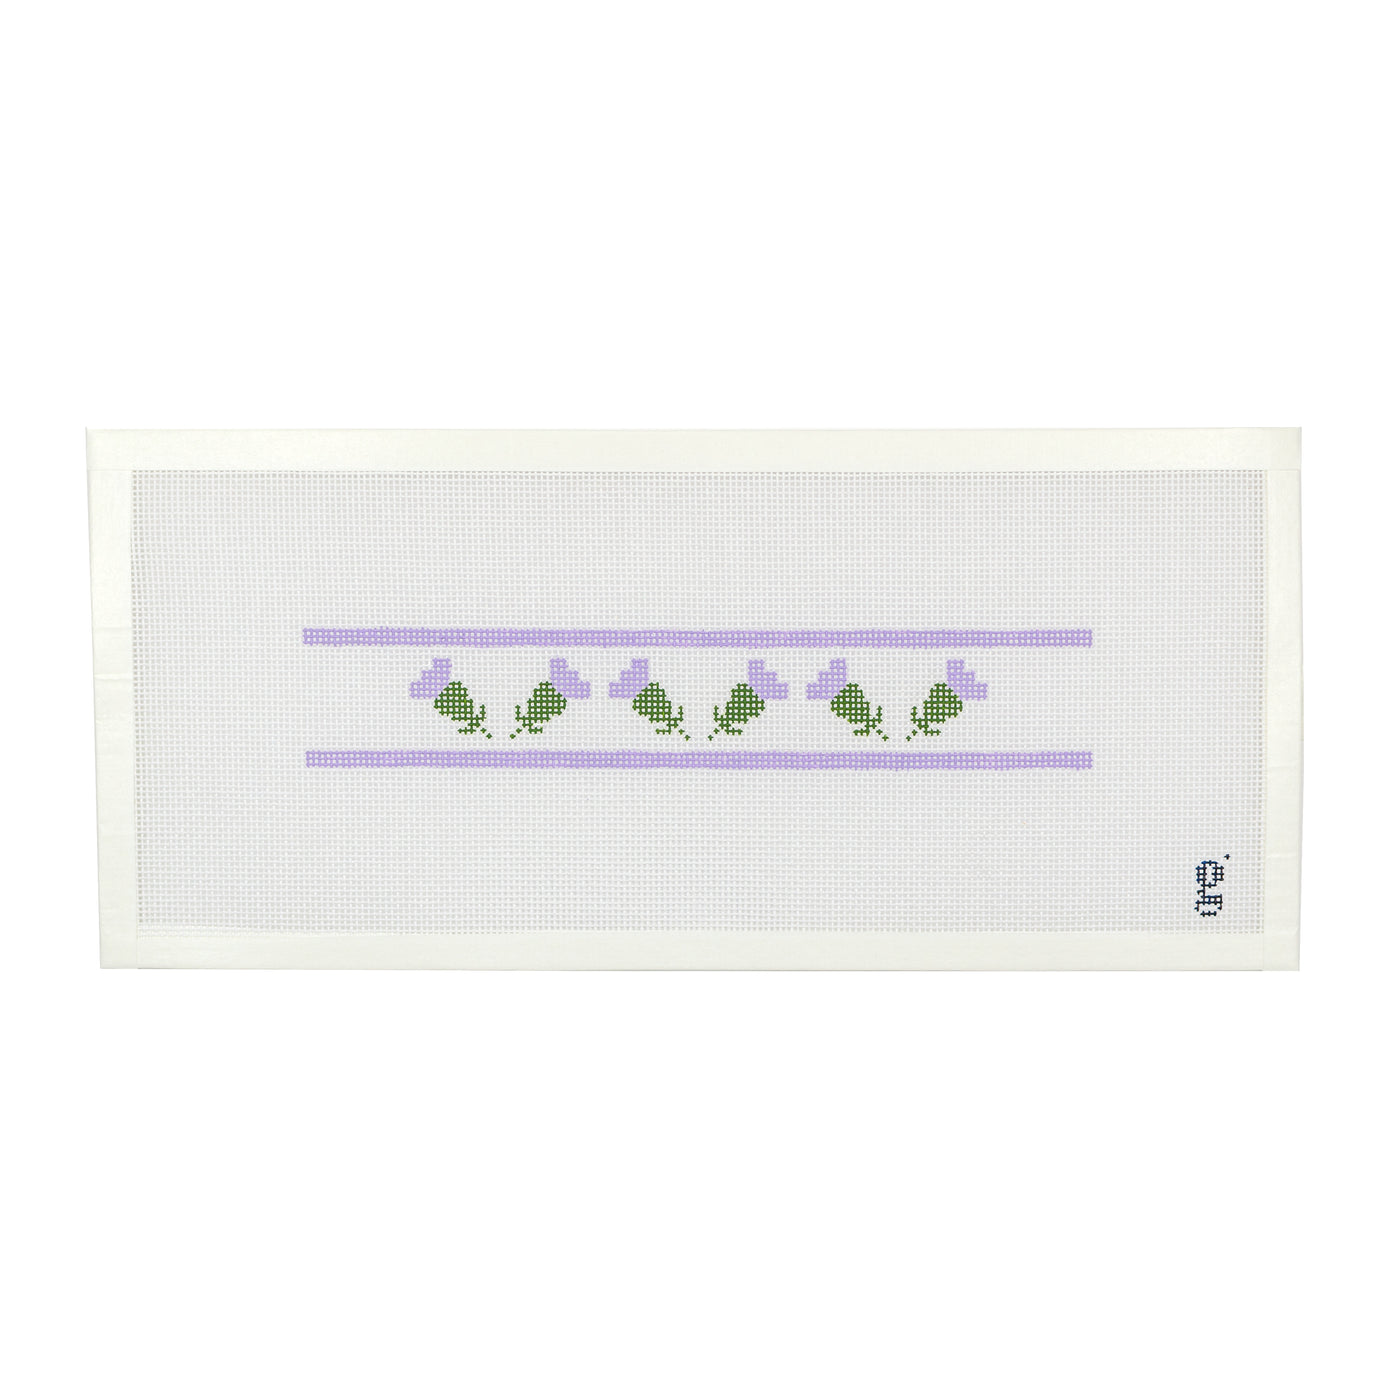 Small rectangular hand painted needlepoint canvas with purple stripe at top and bottom and six purple and green thistles in a line.